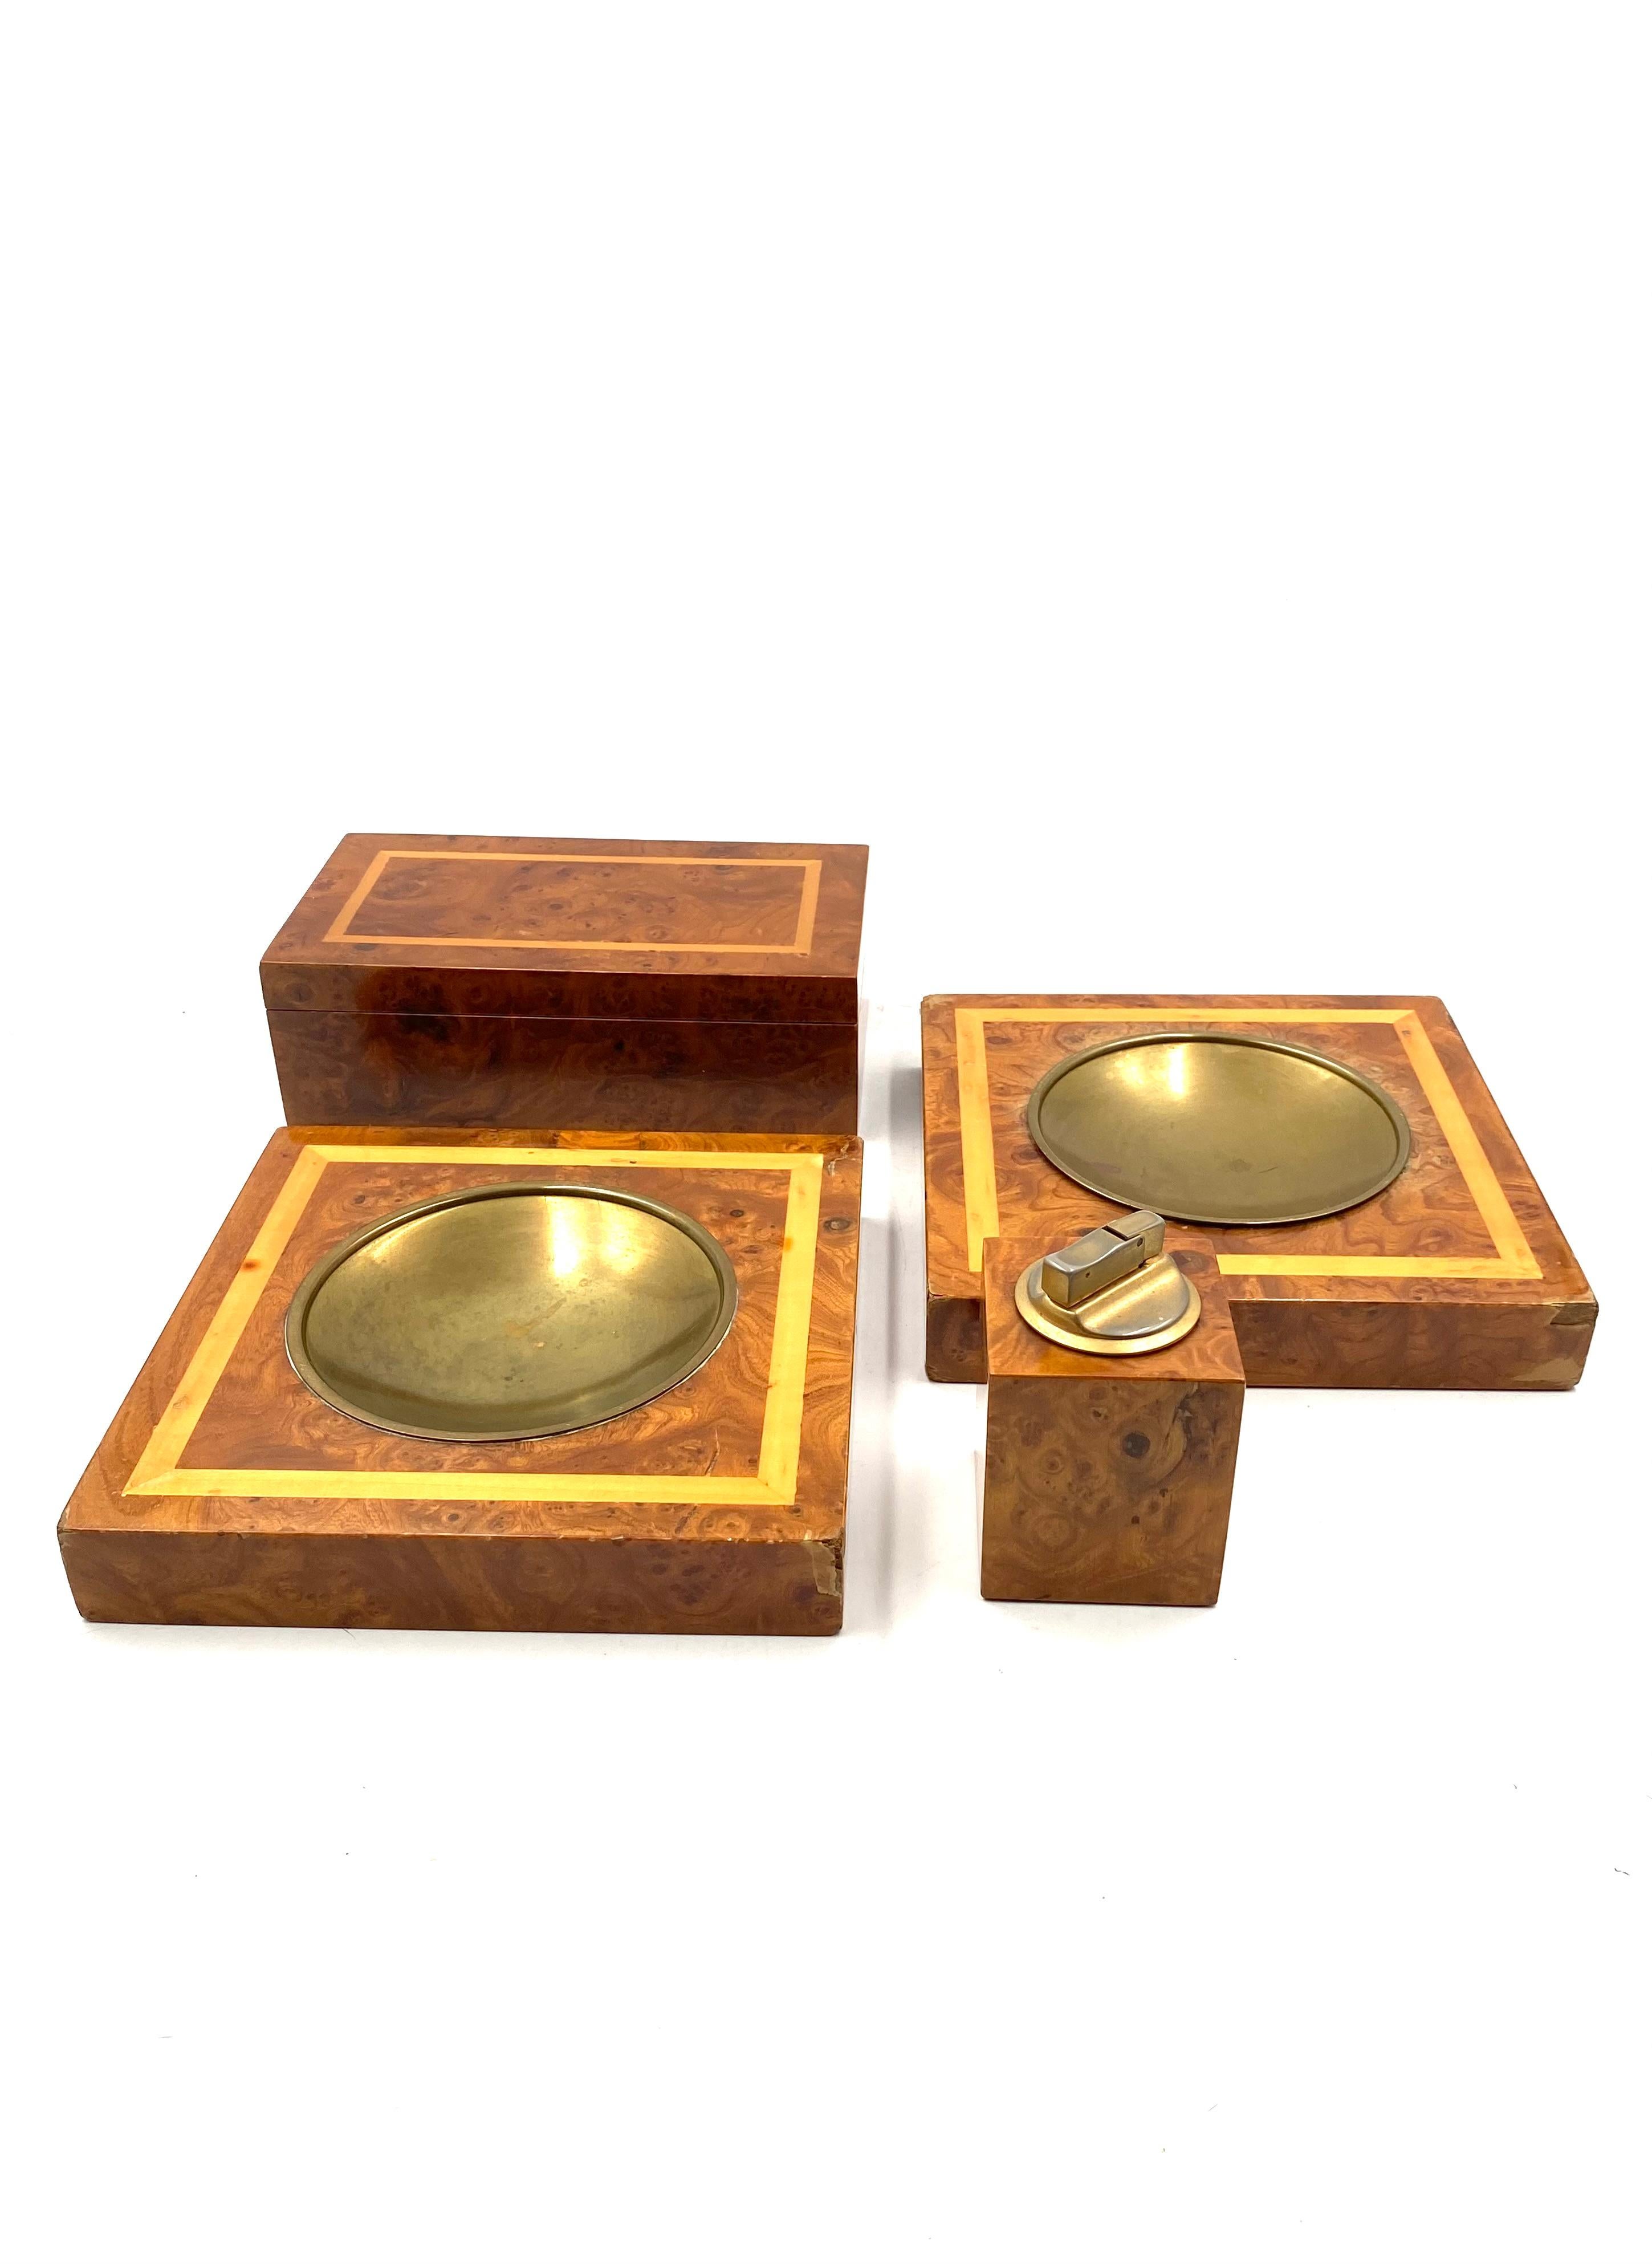 Smoking Set, brass and wood ashtrays, lighter and cigars box, Italy 1970 For Sale 6